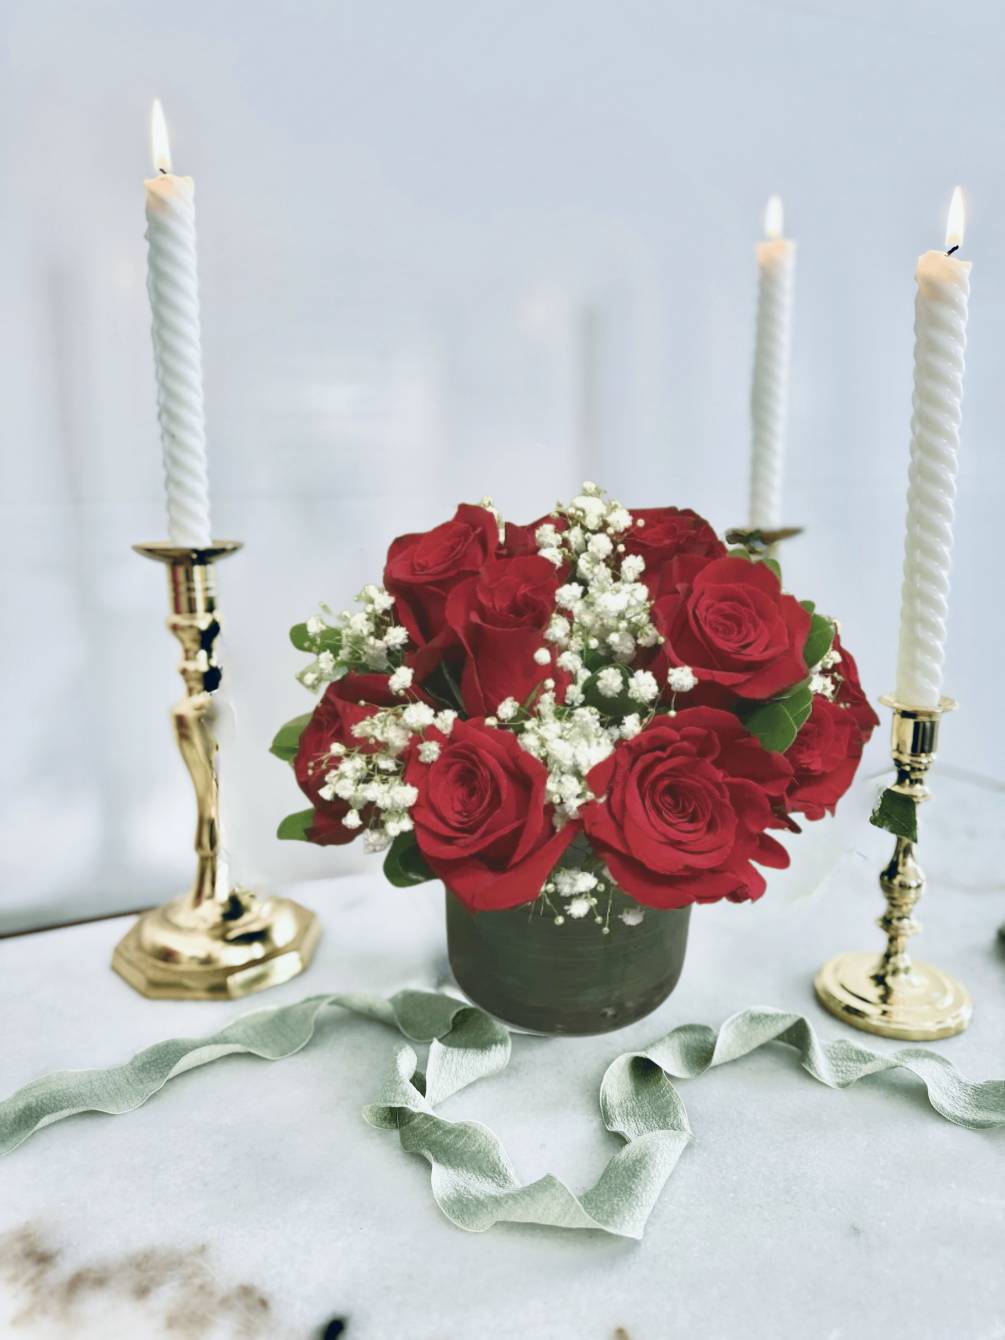 Red roses, pittisporum, and babysbreath arranged in a glass cylinder or cube.

CANDLES